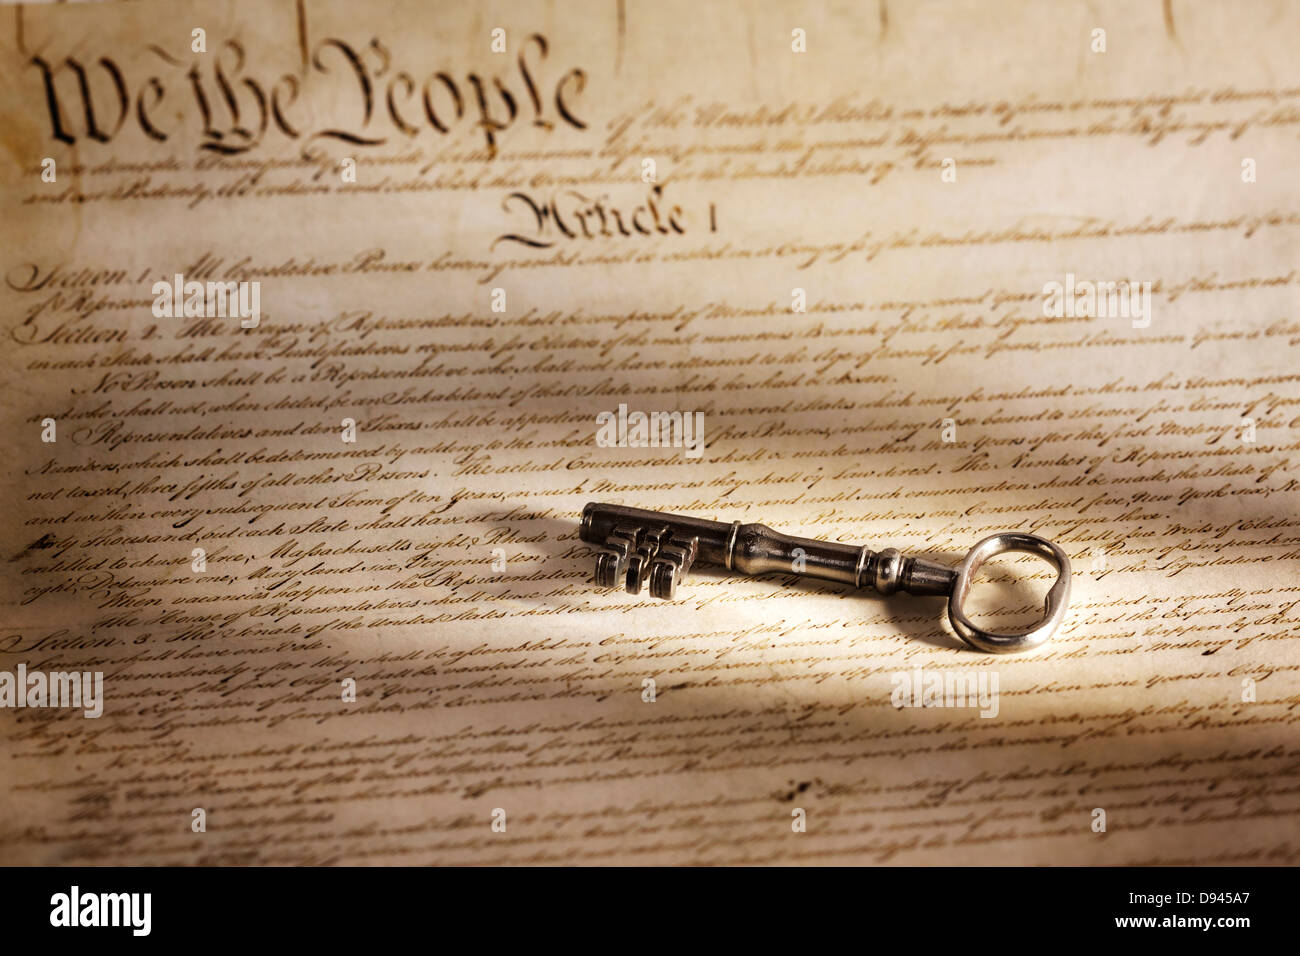 Key to the American Constitution - a large key on a copy of the American constitution. Stock Photo